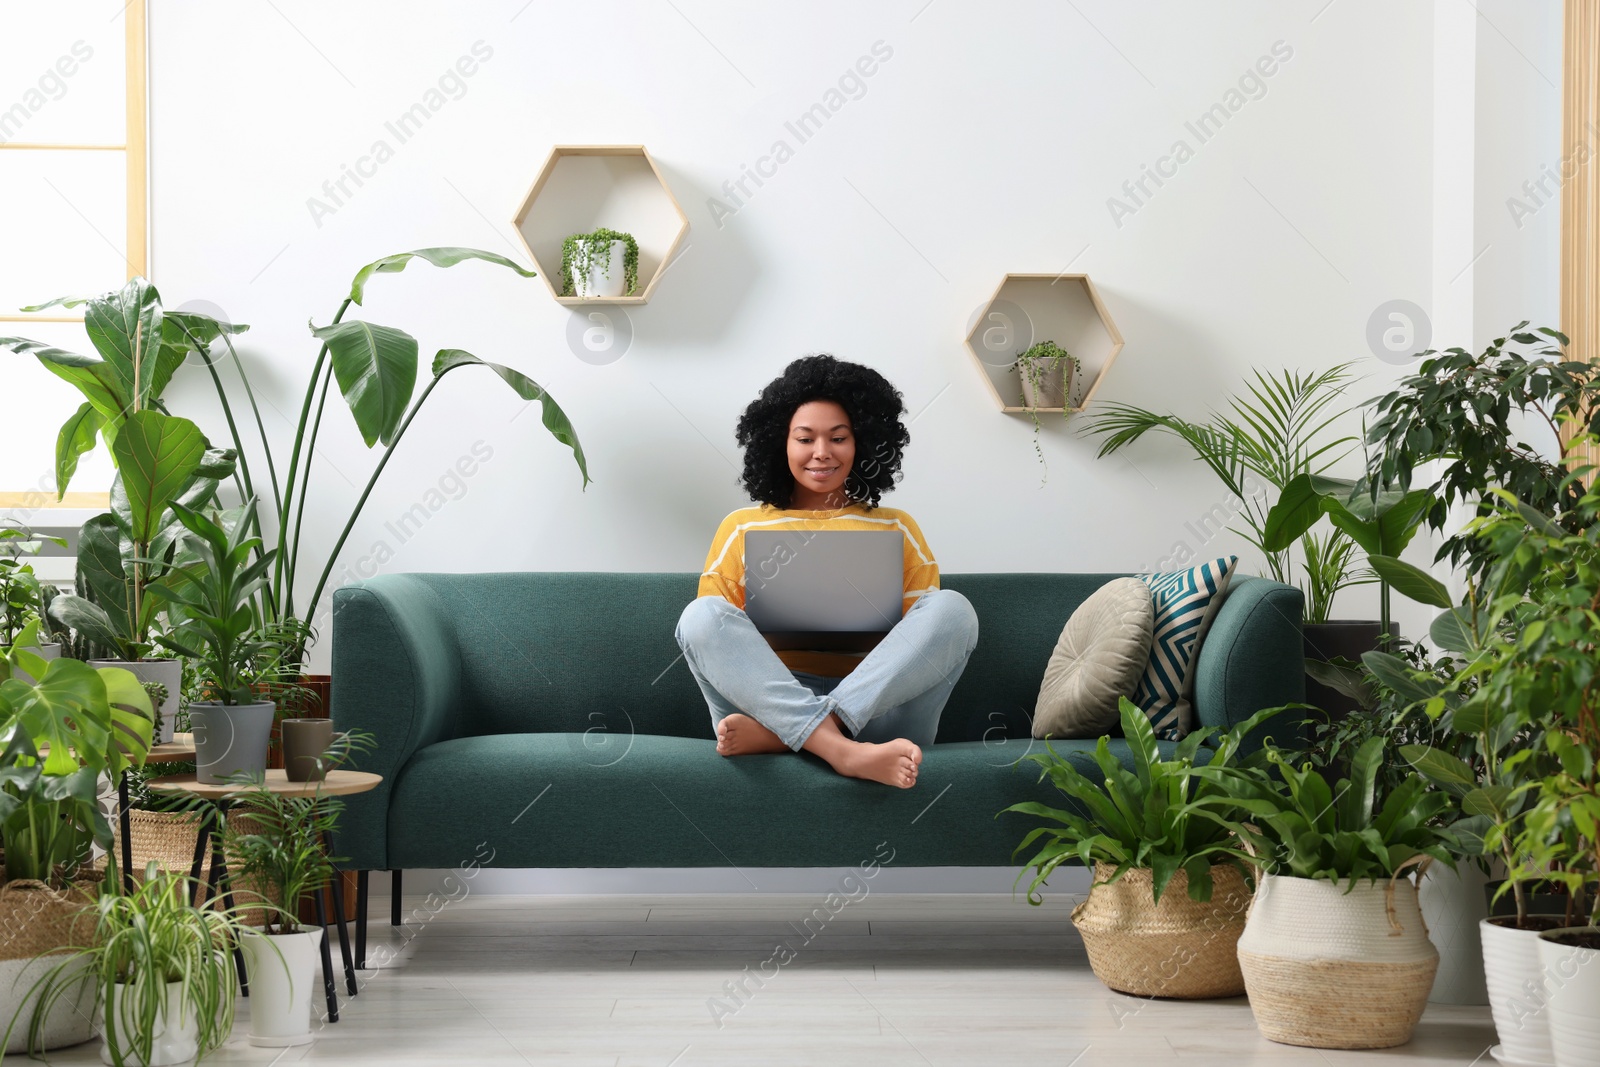 Photo of Relaxing atmosphere. Happy woman with laptop on sofa surrounded by beautiful houseplants in room